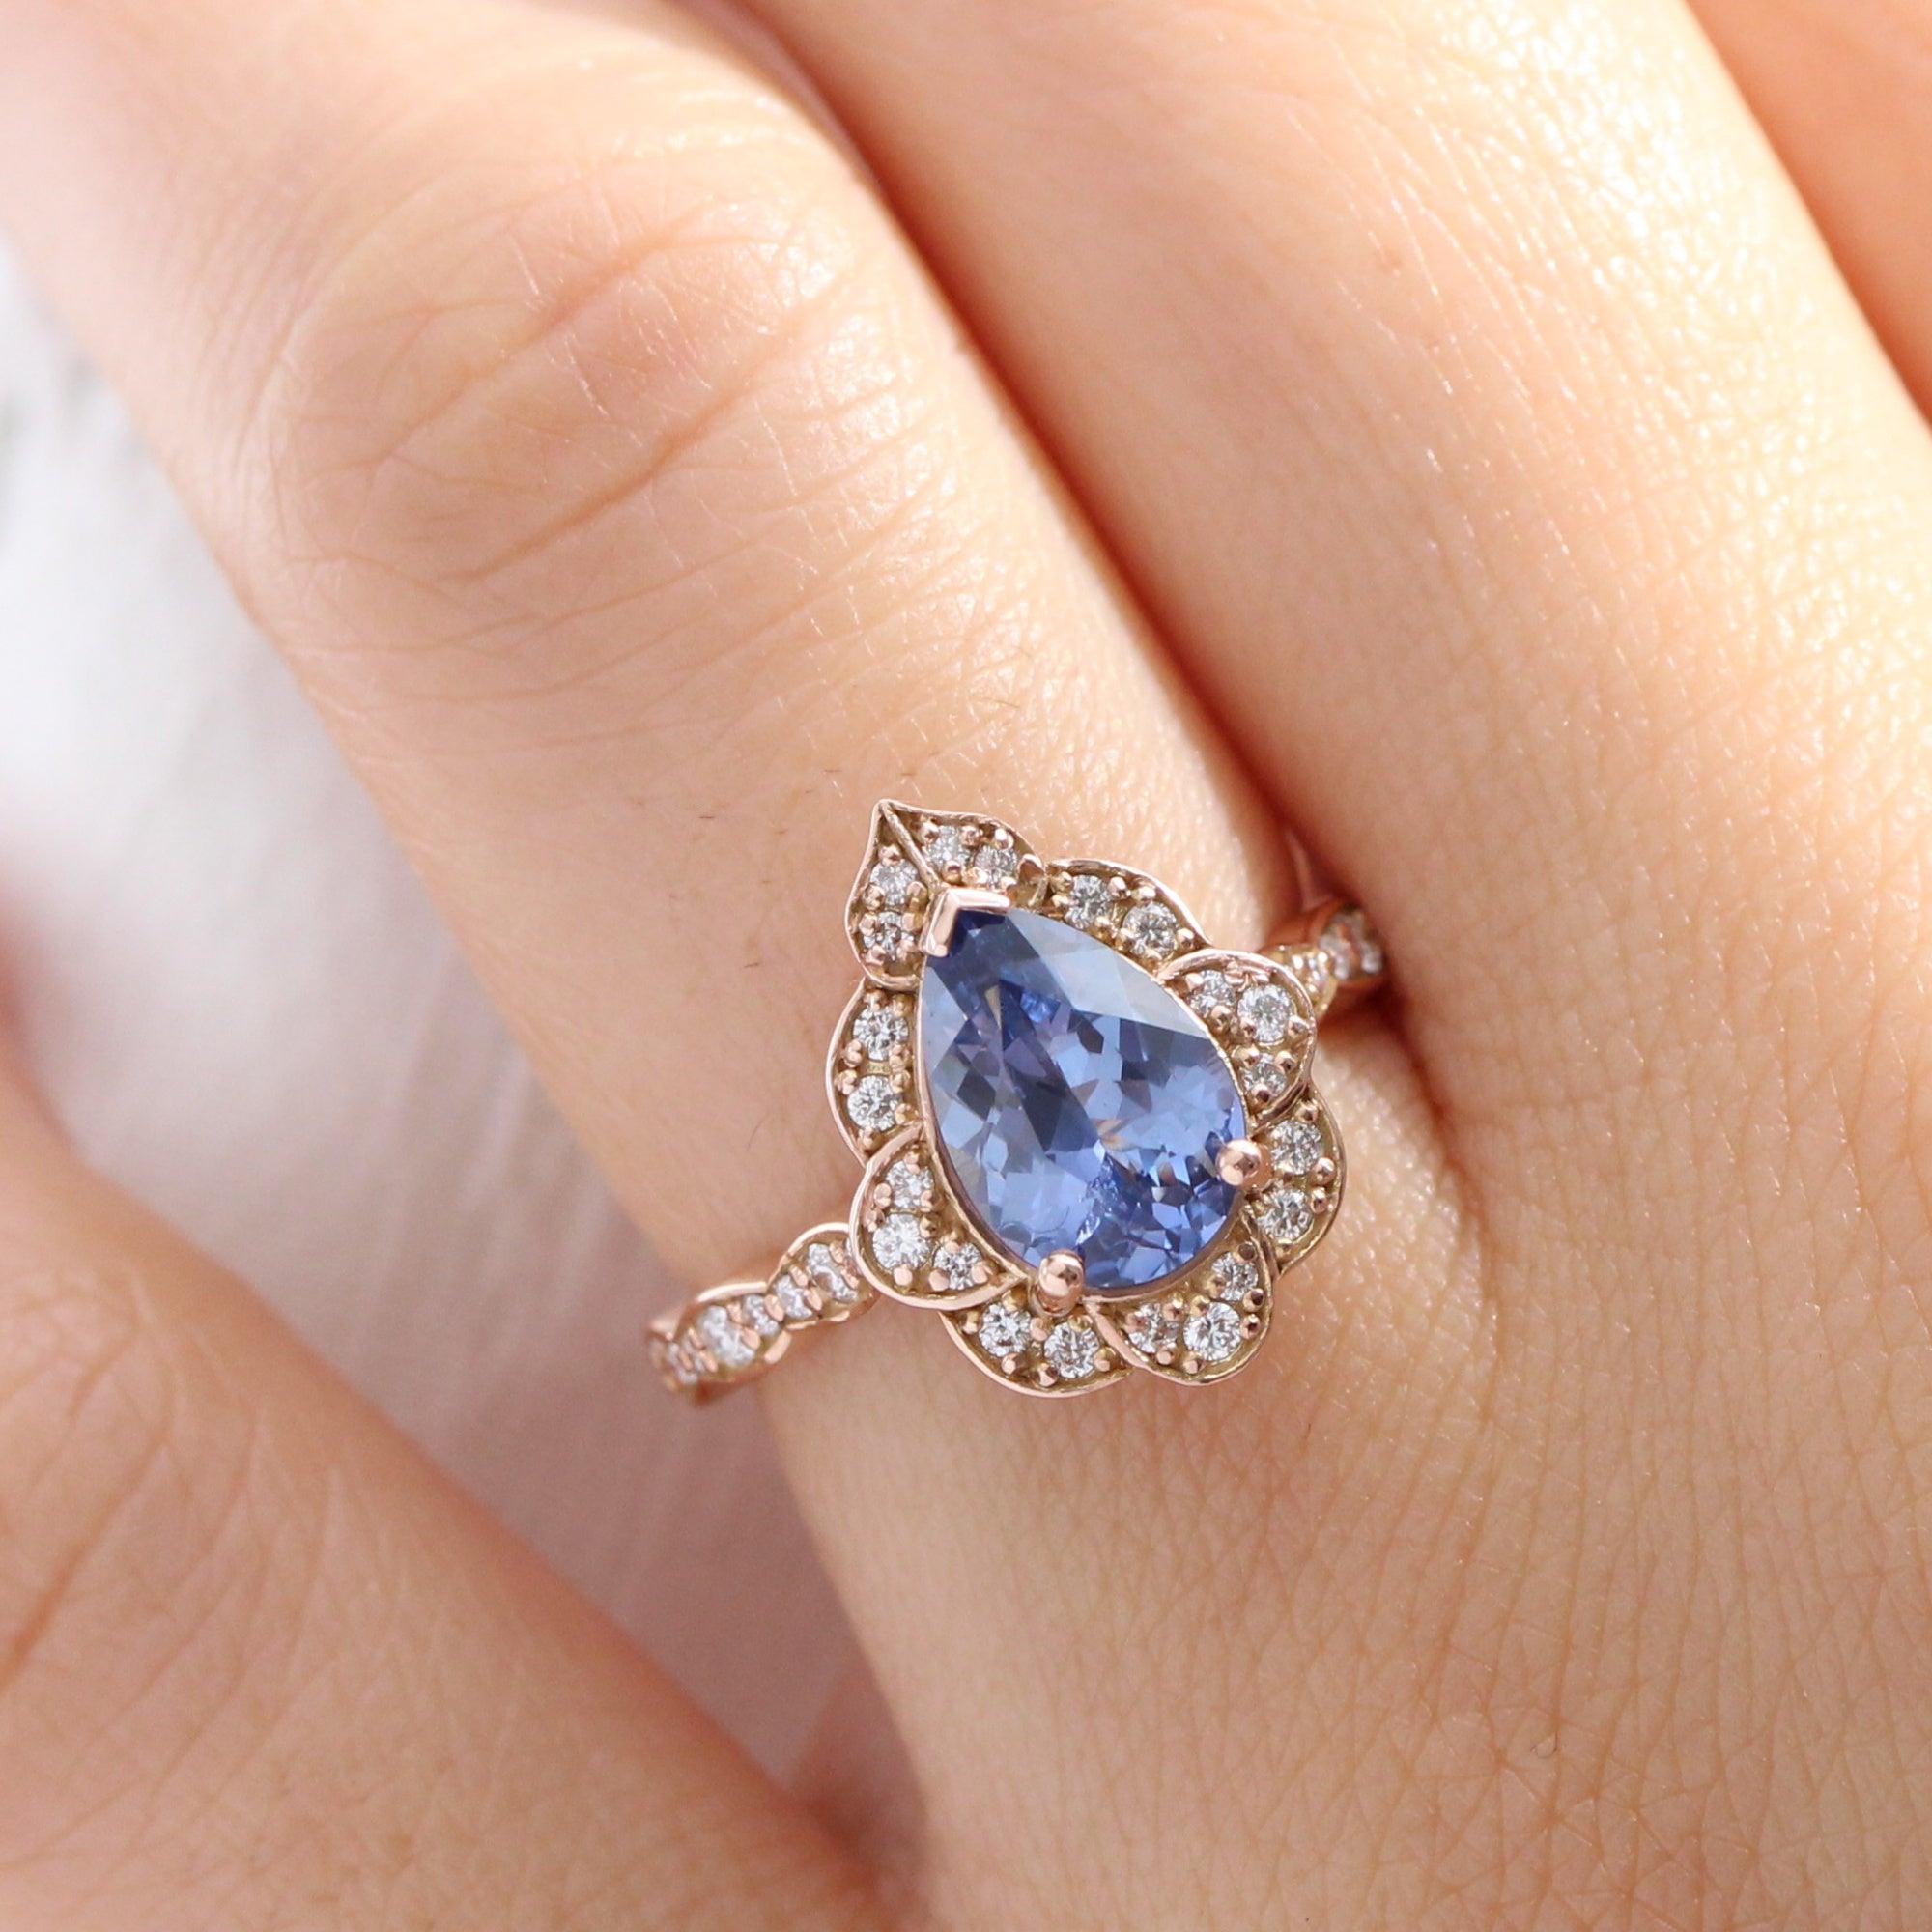 Large pear blue sapphire ring rose gold vintage halo diamond ring la more design jewelry